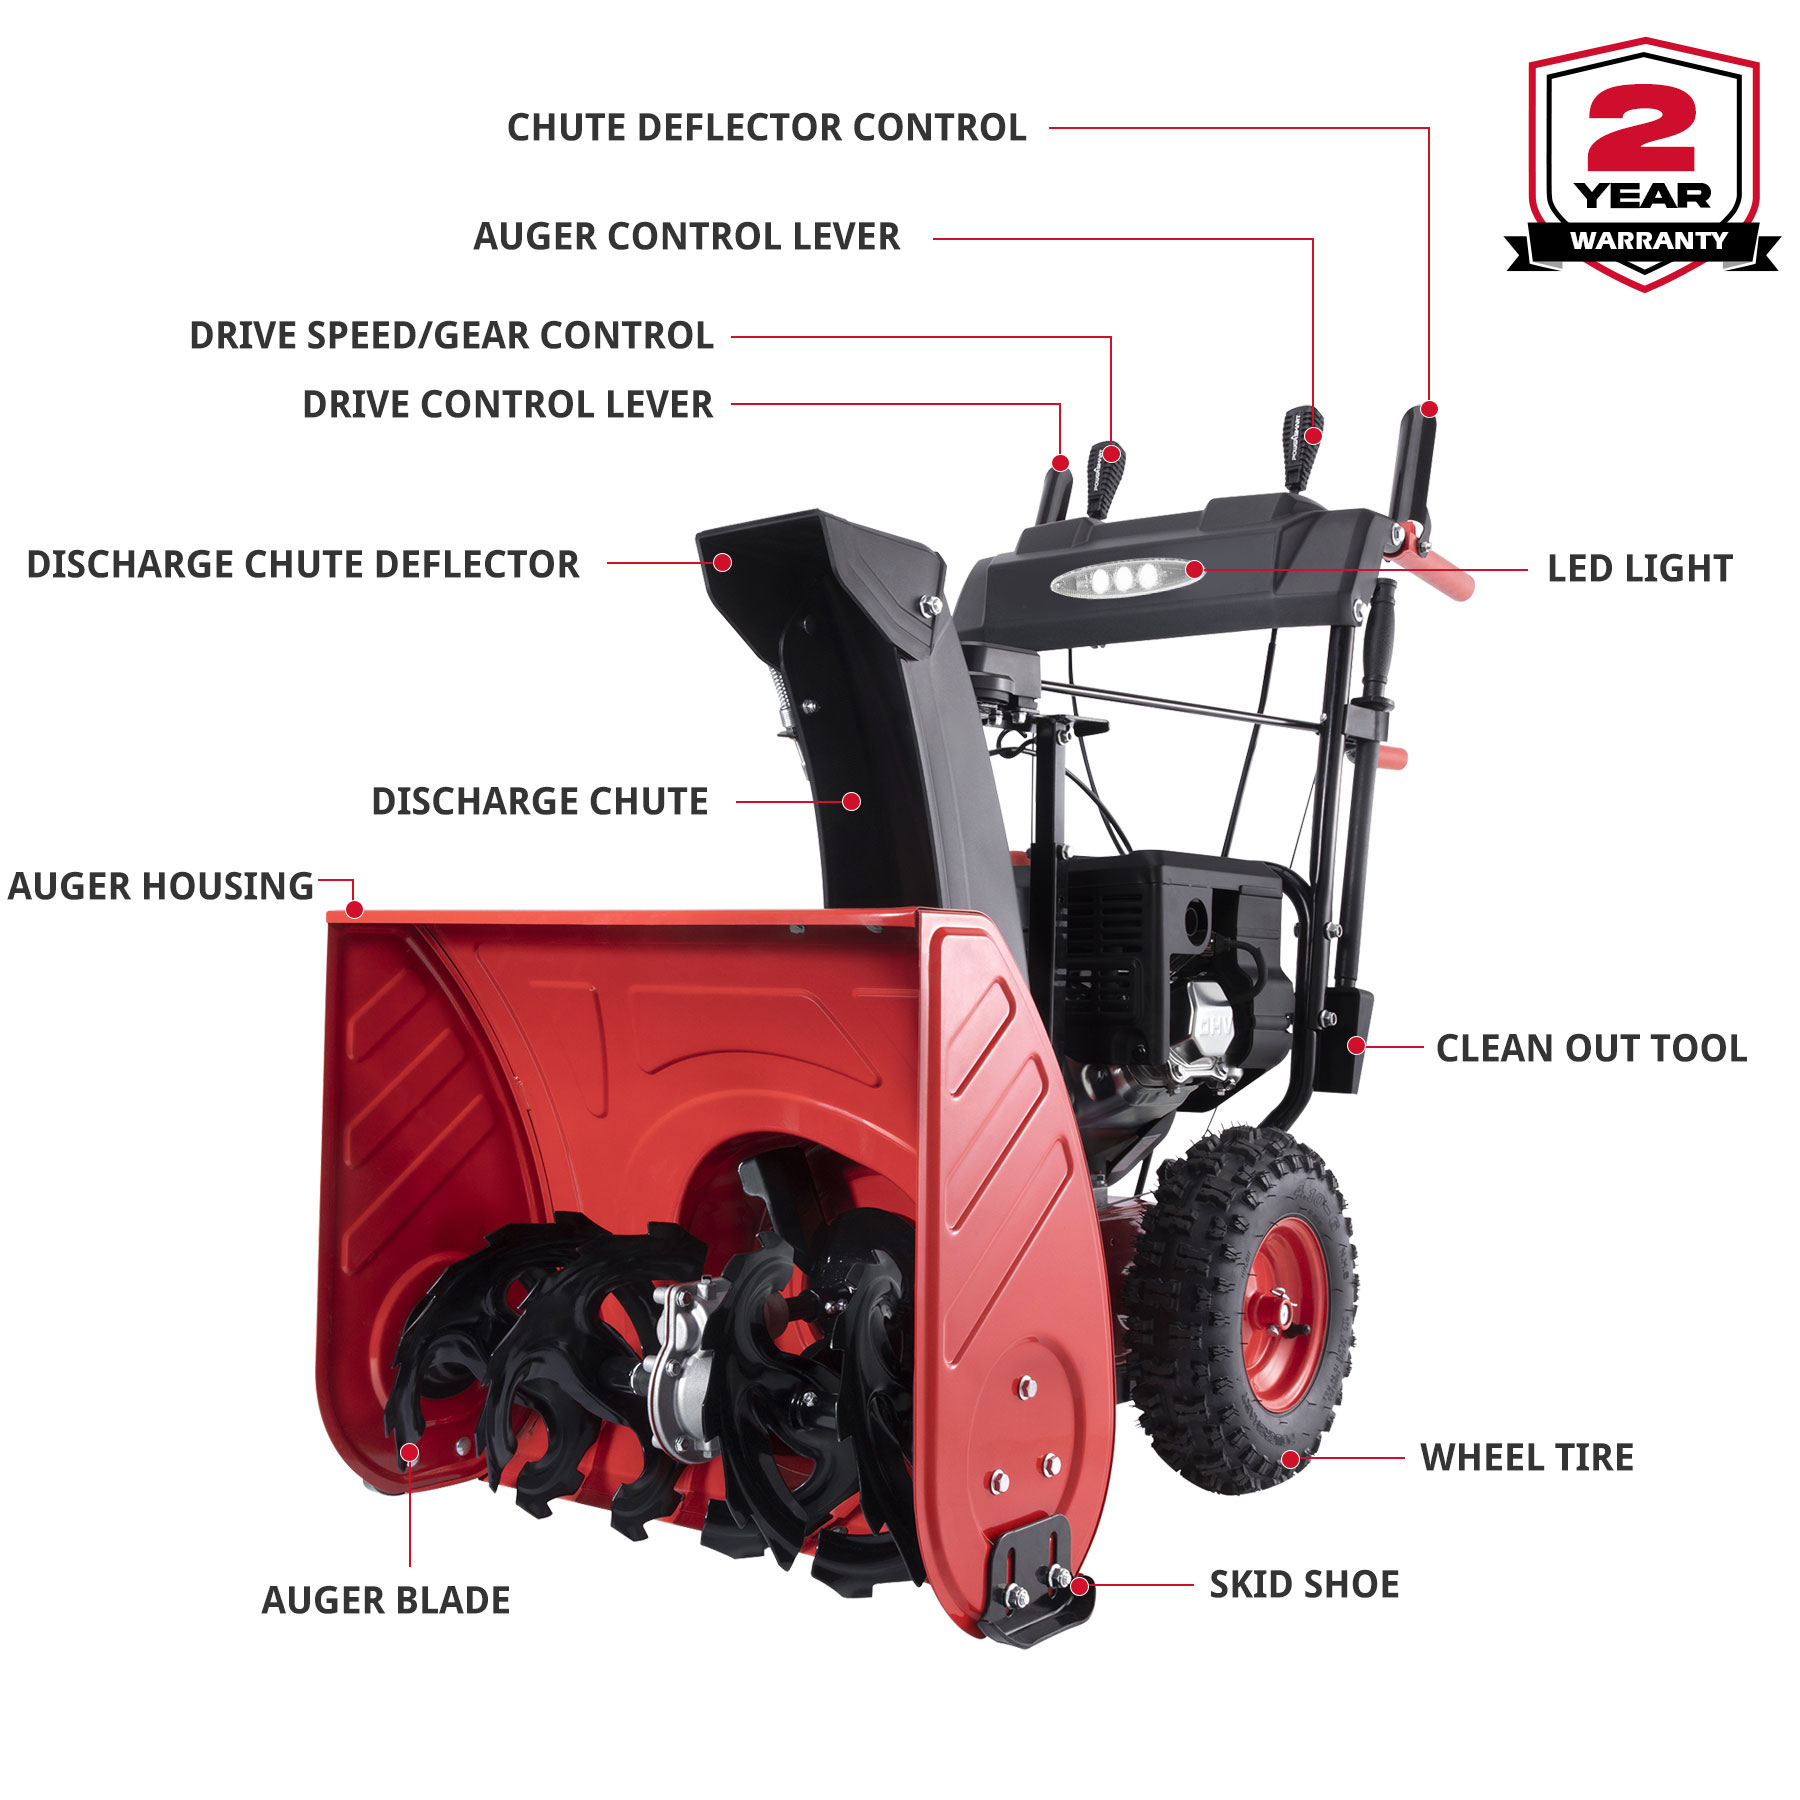 PowerSmart Gas Snow Blower: 24 in. Two-Stage, Electric Start, 212CC Self-Propelled Snow Blower with LED Headlight - image 3 of 9